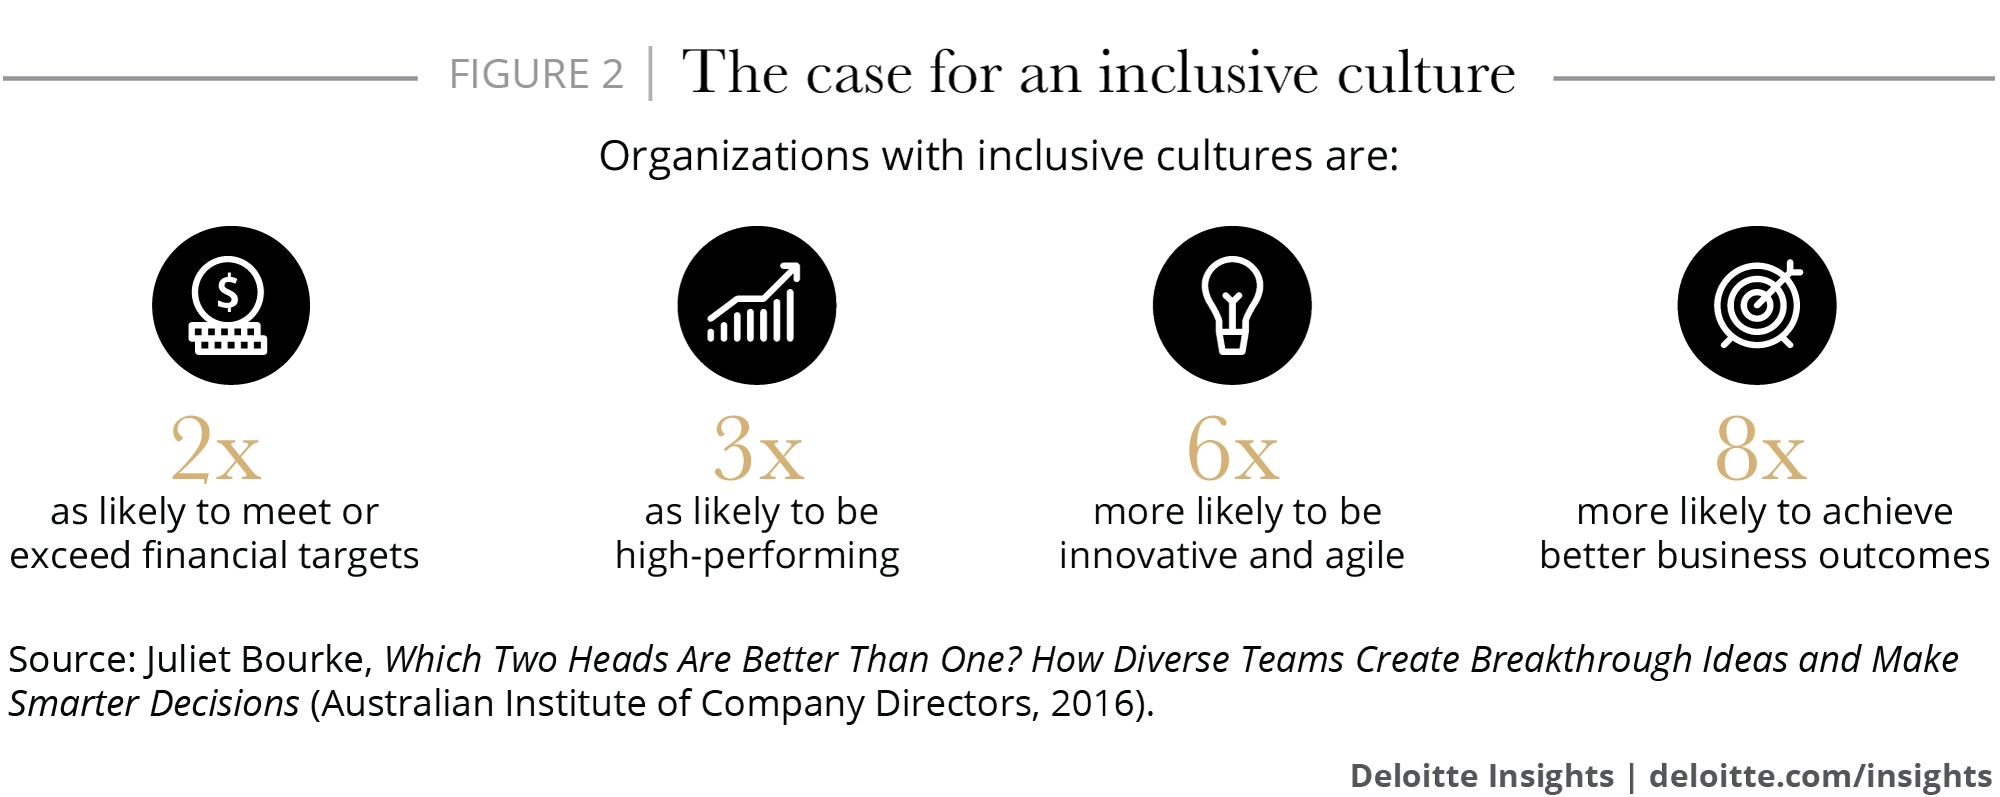 The case for an inclusive culture